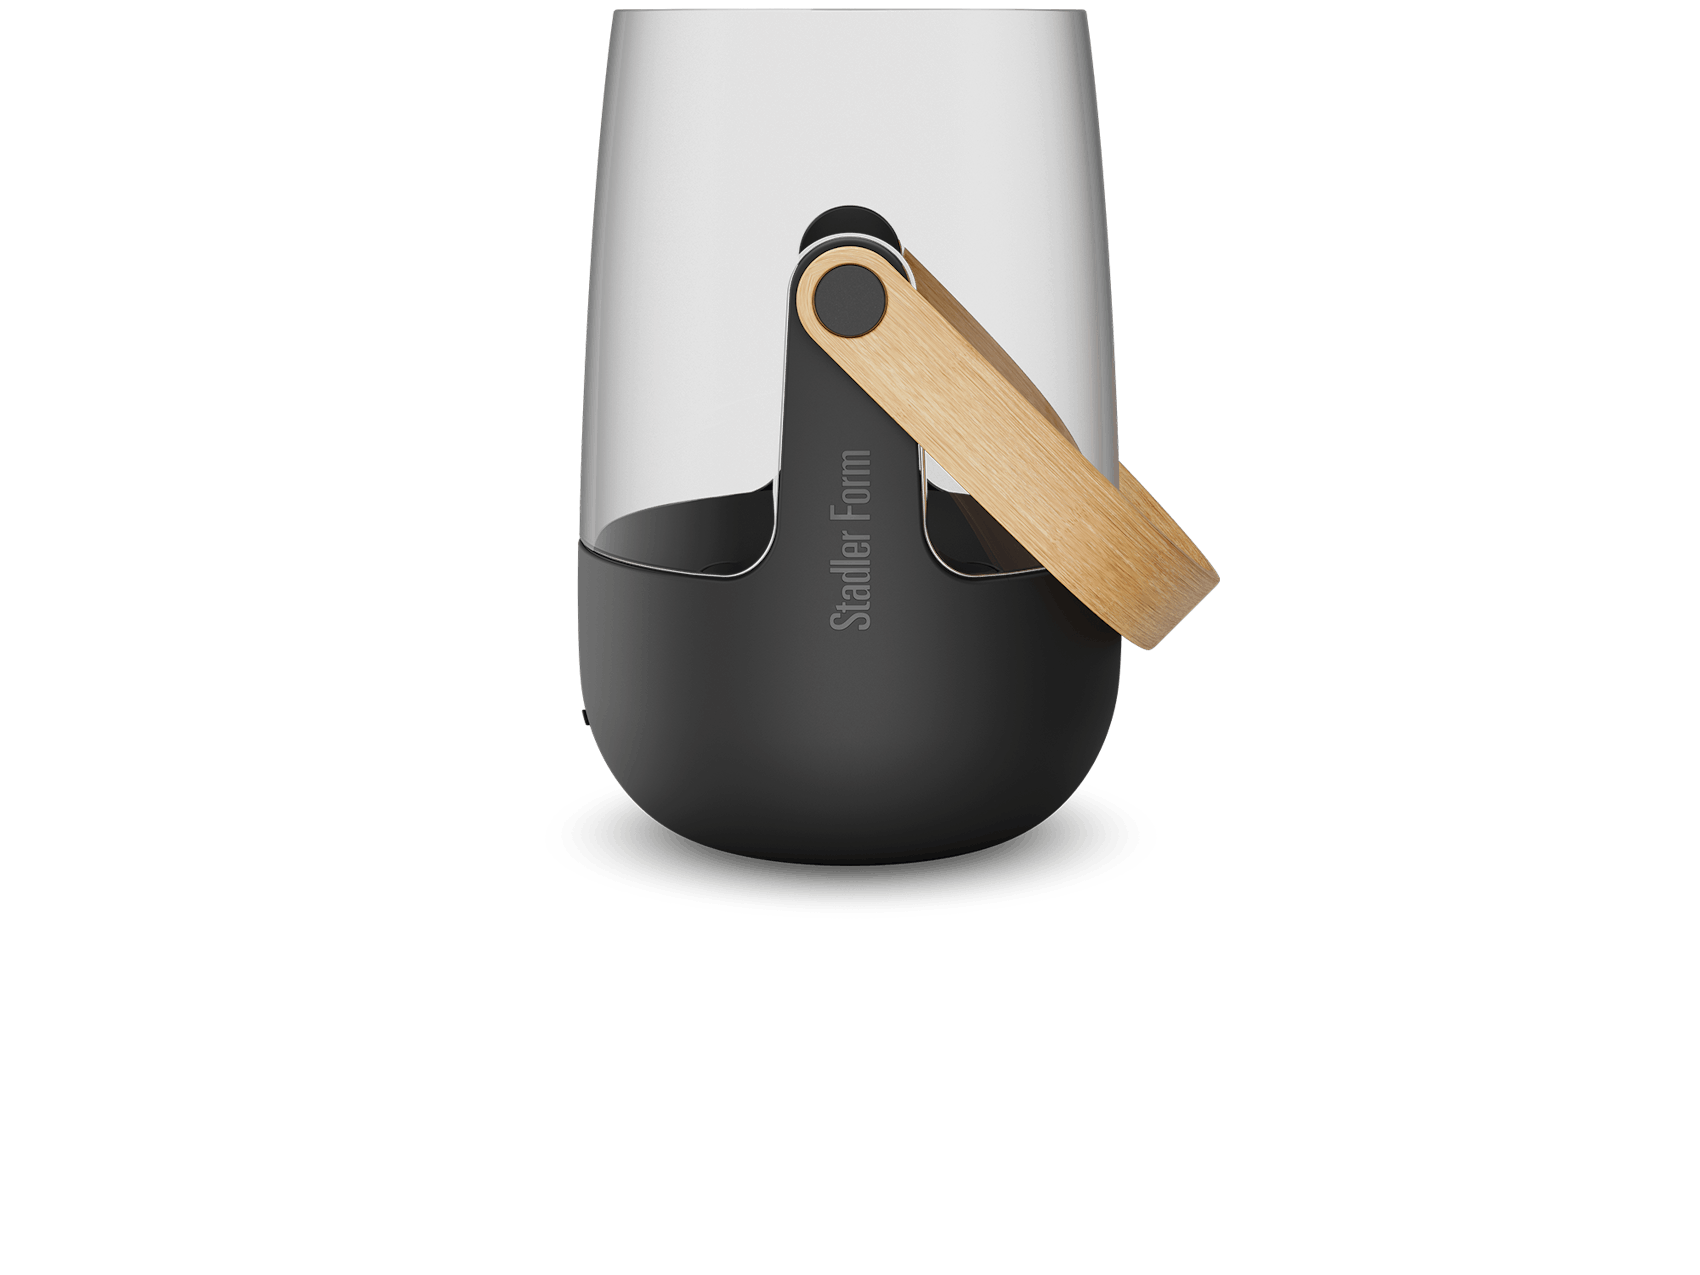 Sophie little aroma diffuser by Stadler Form in black as side view